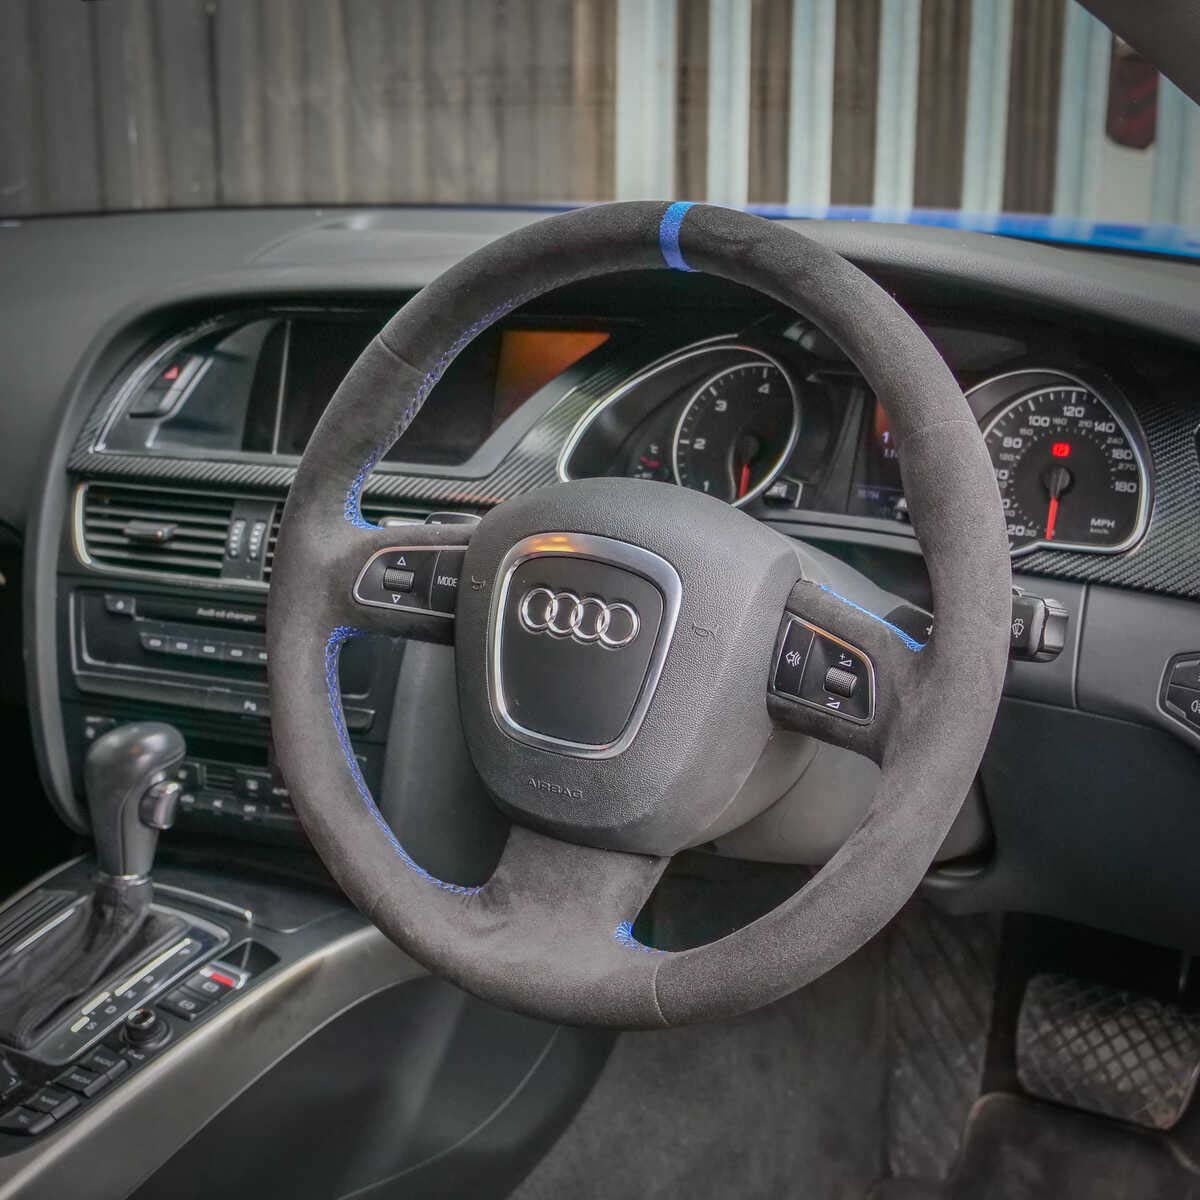 The interior of an audi s5